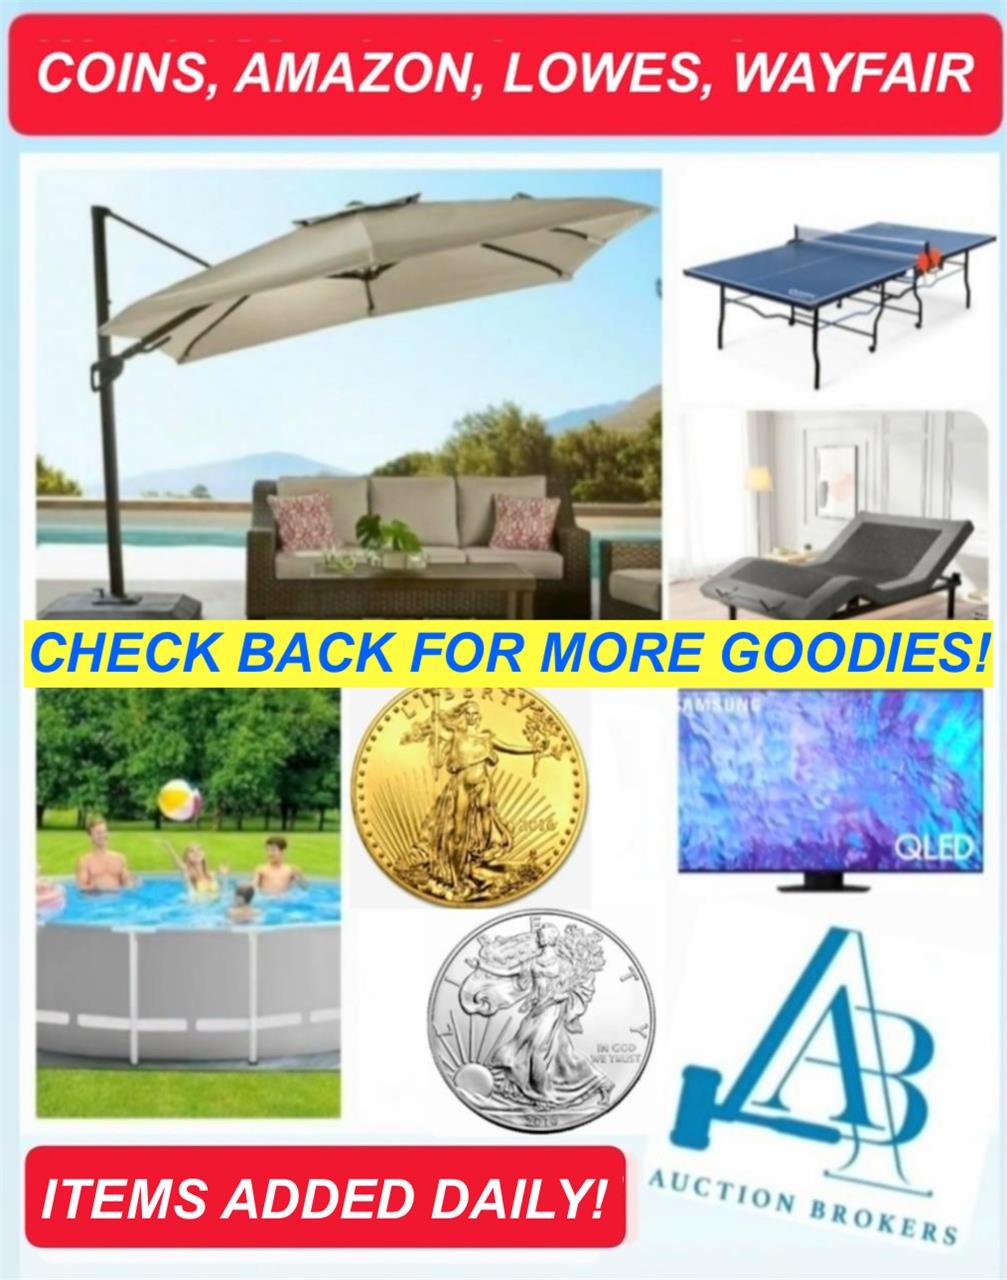 MORE ITEMS COMING SOON! Coins, Amazon, Lowes ENDS 6-17